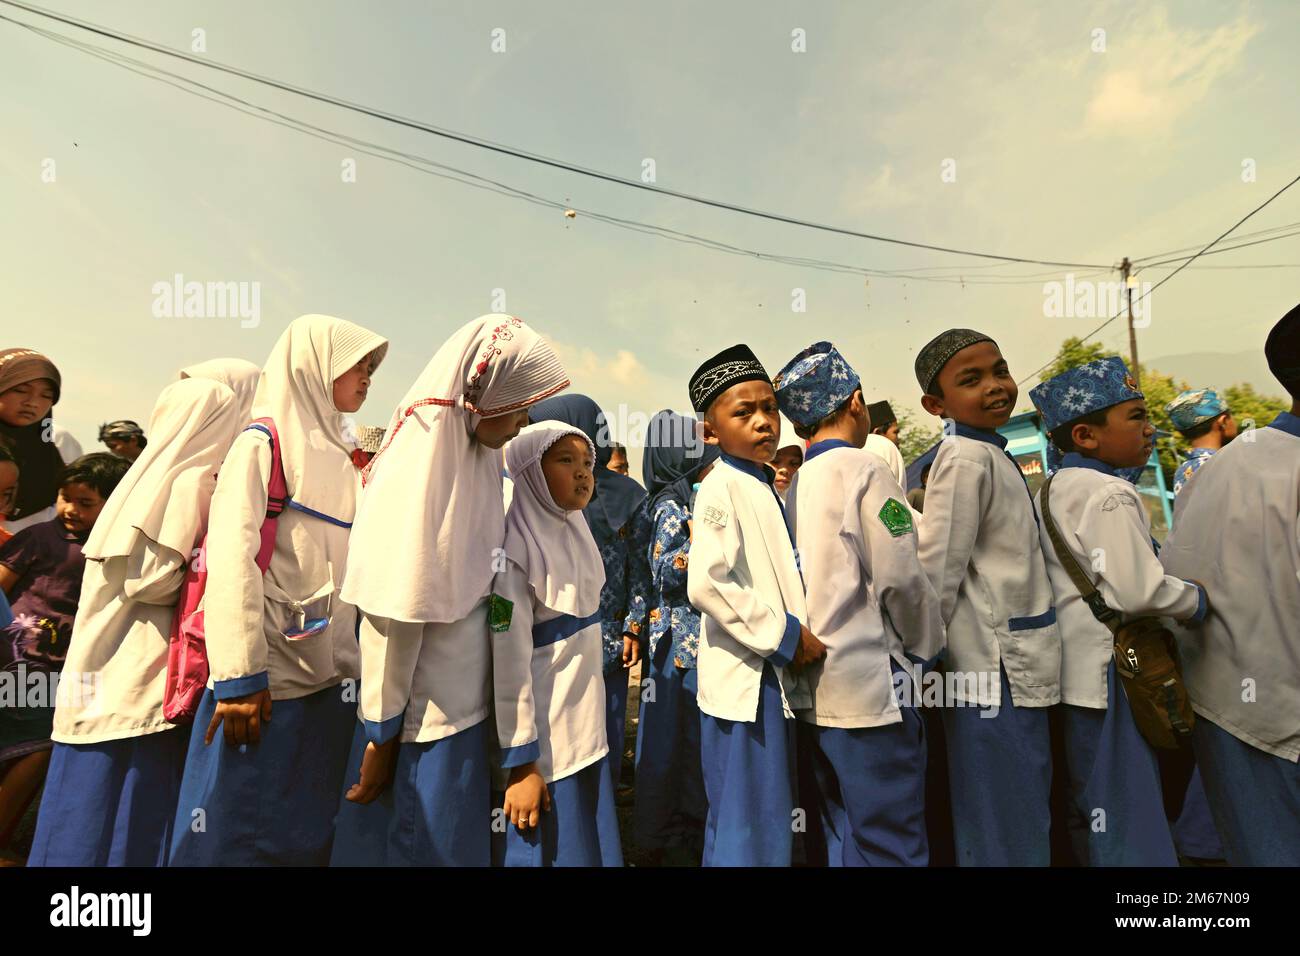 Cianjur, West Java, Indonesia. 22nd August 2015. Children students of Islamic boarding school are queueing to participate in a parade during 'Festival Sarongge', an agricultural thanksgiving event carried out simultaneously with the celebration of Indonesia's independence day, which is commemorated each year on August 17, in Ciputri, Pacet, Cianjur, West Java, Indonesia. Stock Photo